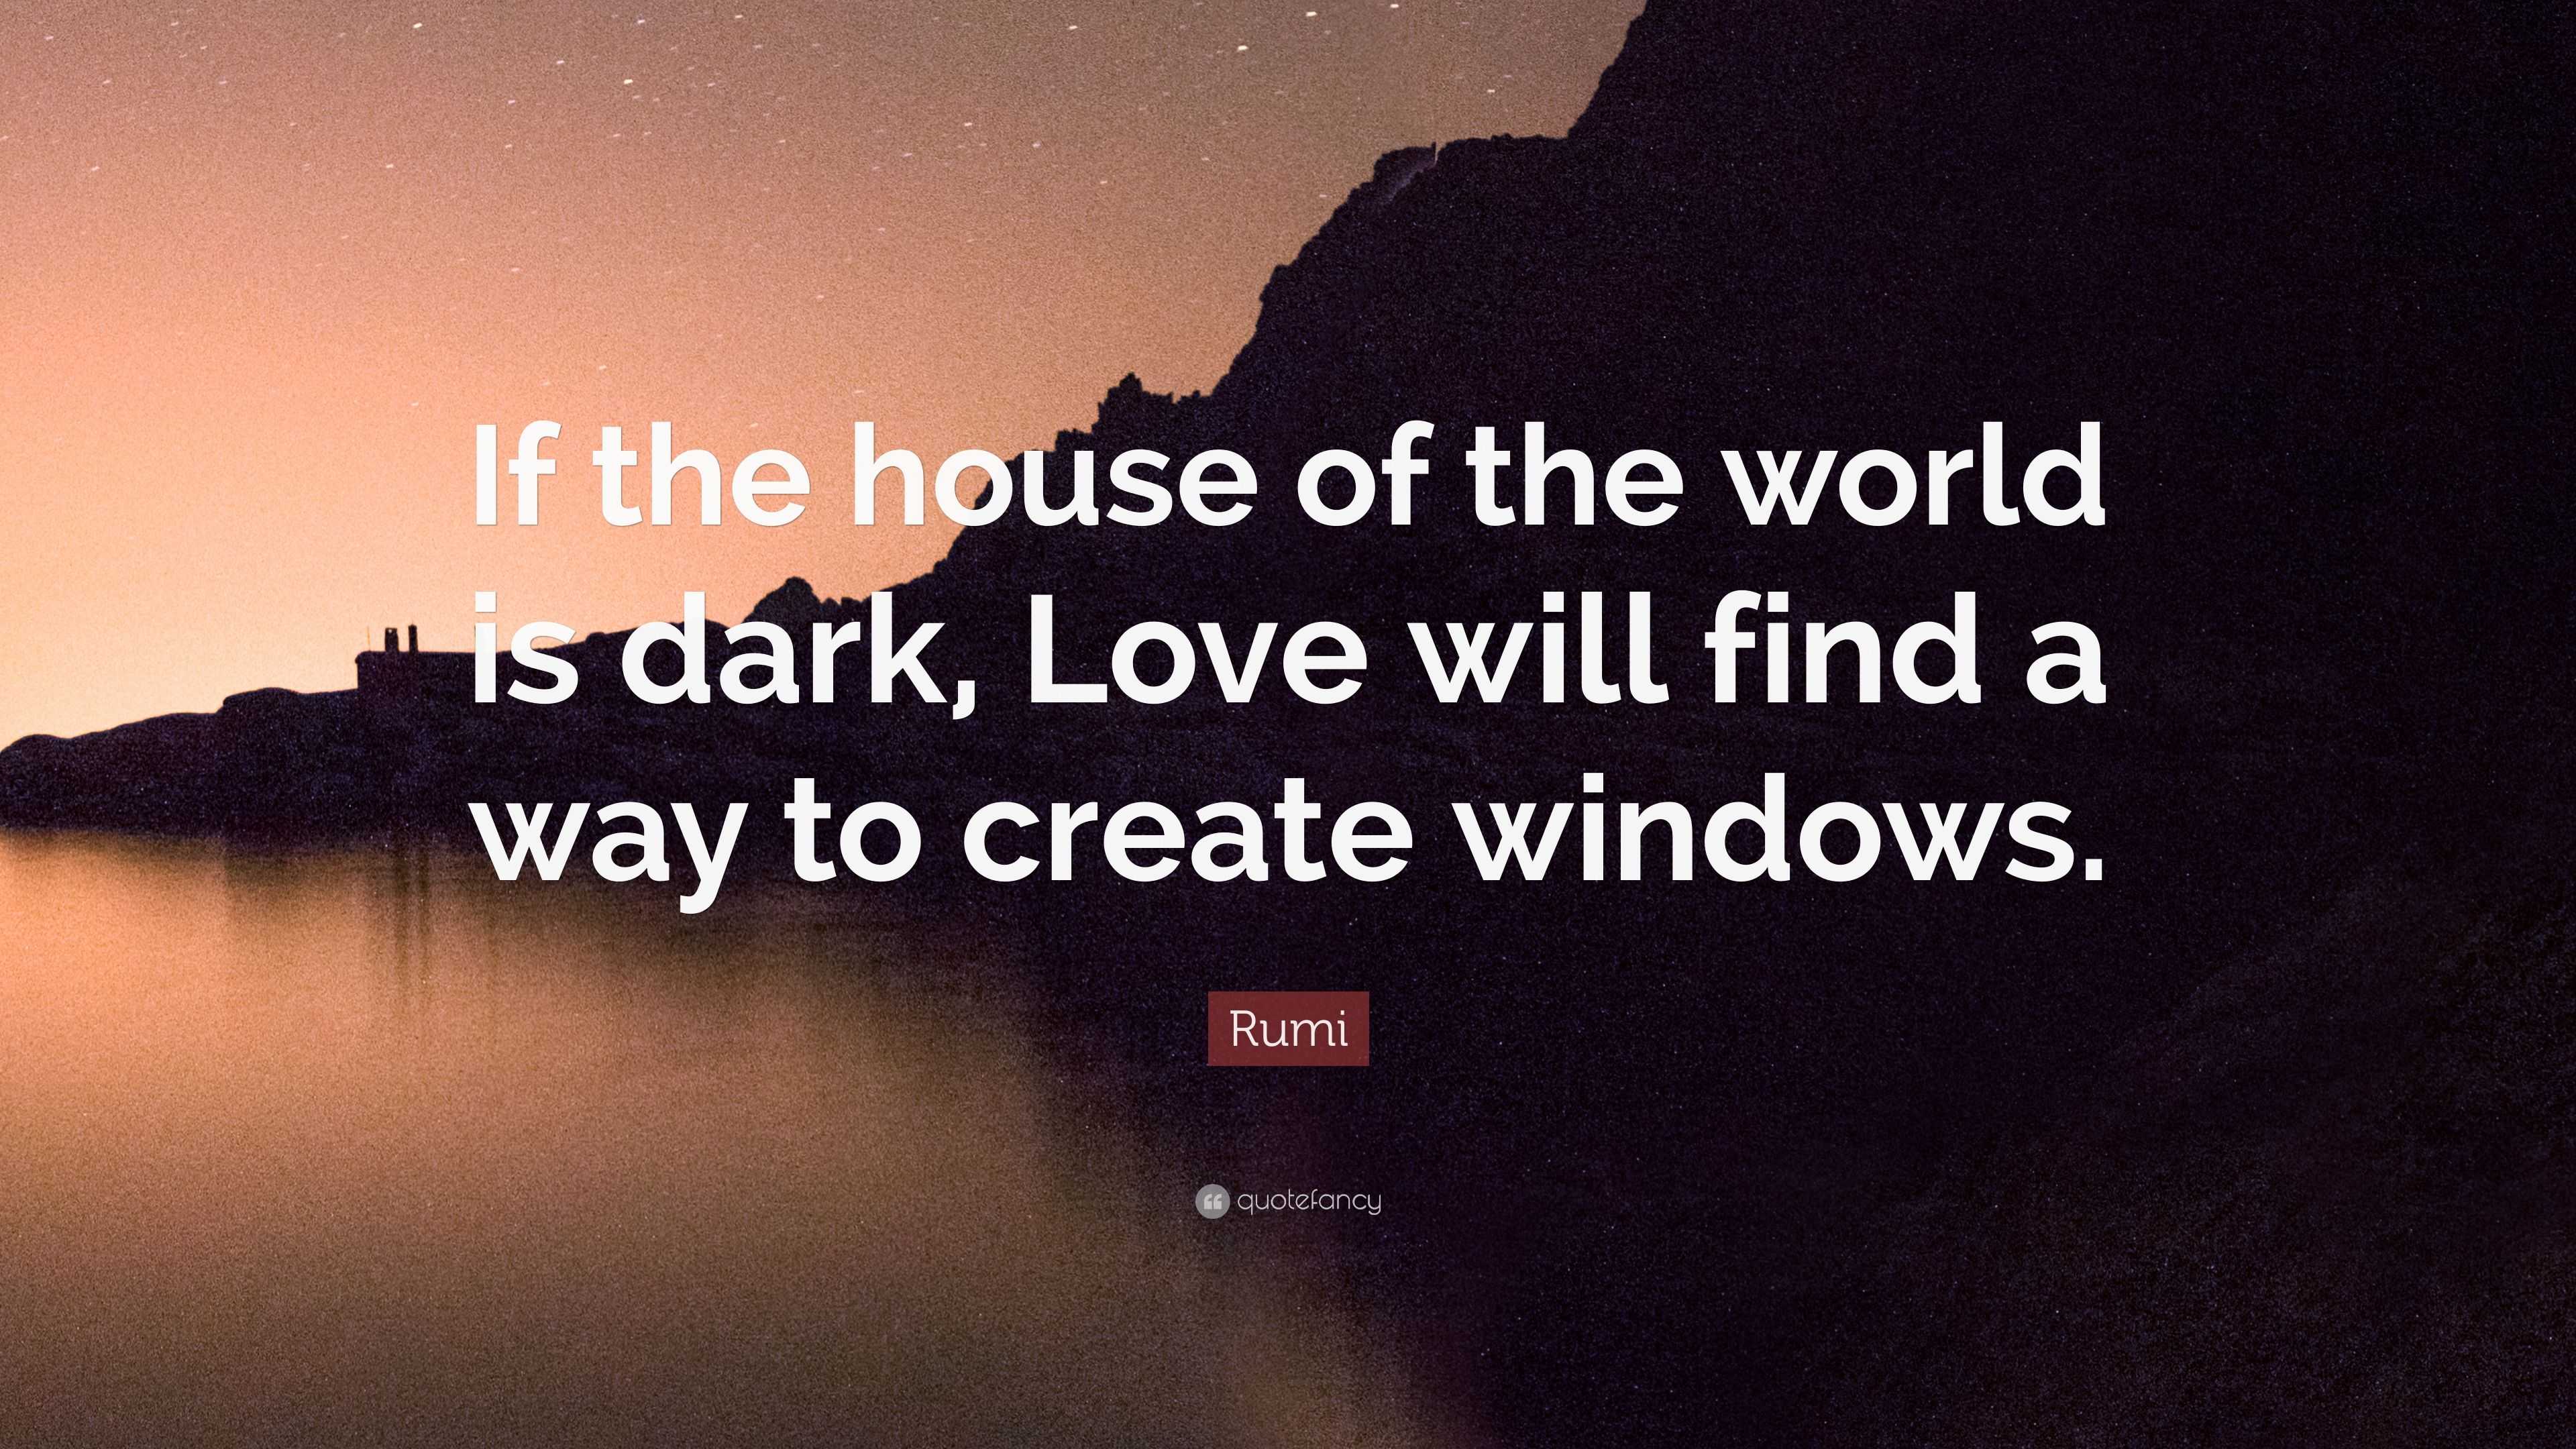 Rumi Quote “If the house of the world is dark Love will find